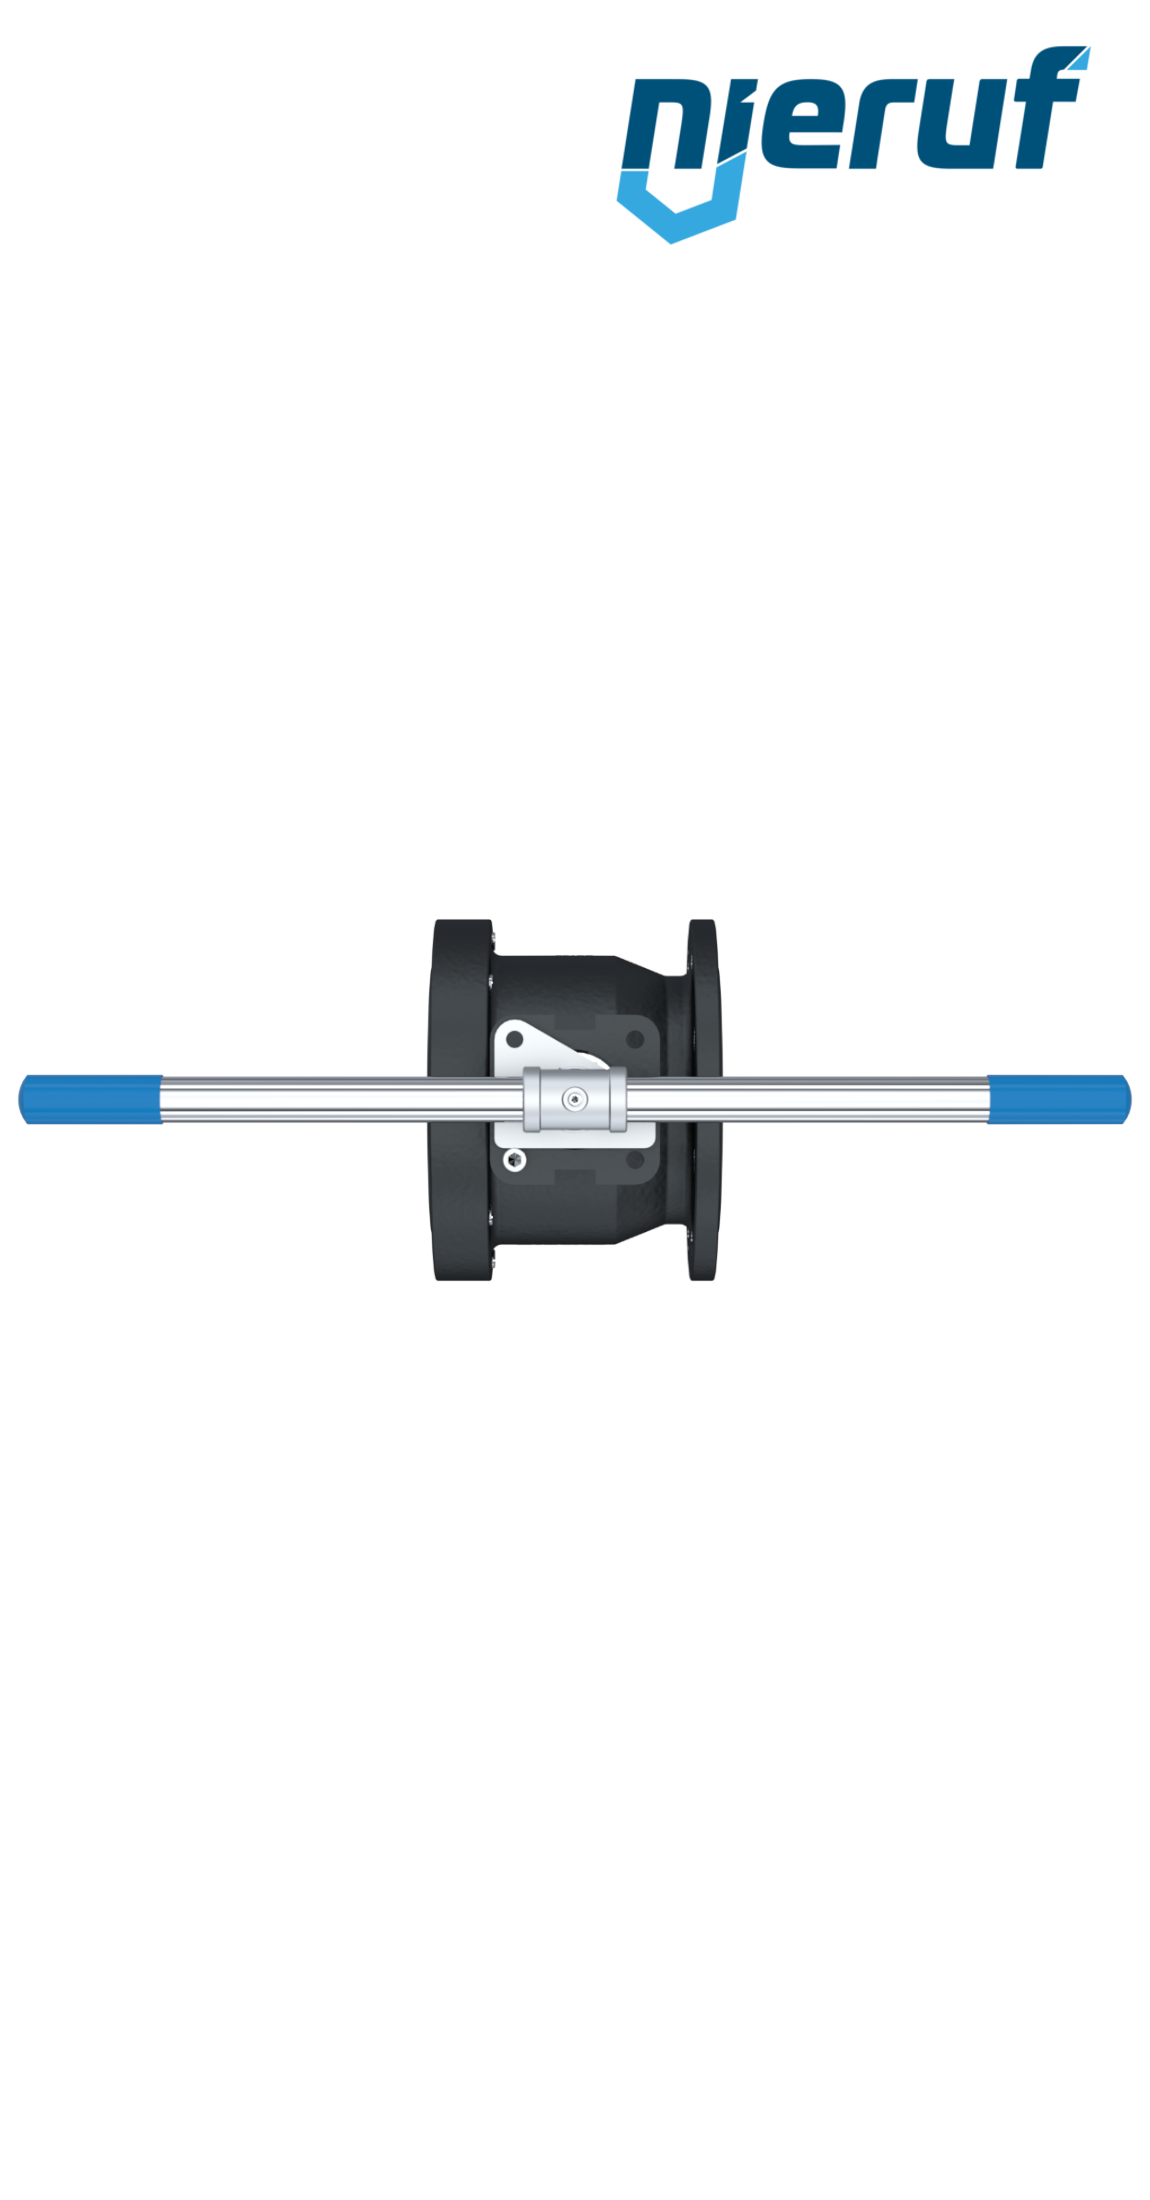 Compact ball valve DN150 PN16 FK03 carbon steel 1.0619 ball stainless steel 1.4408